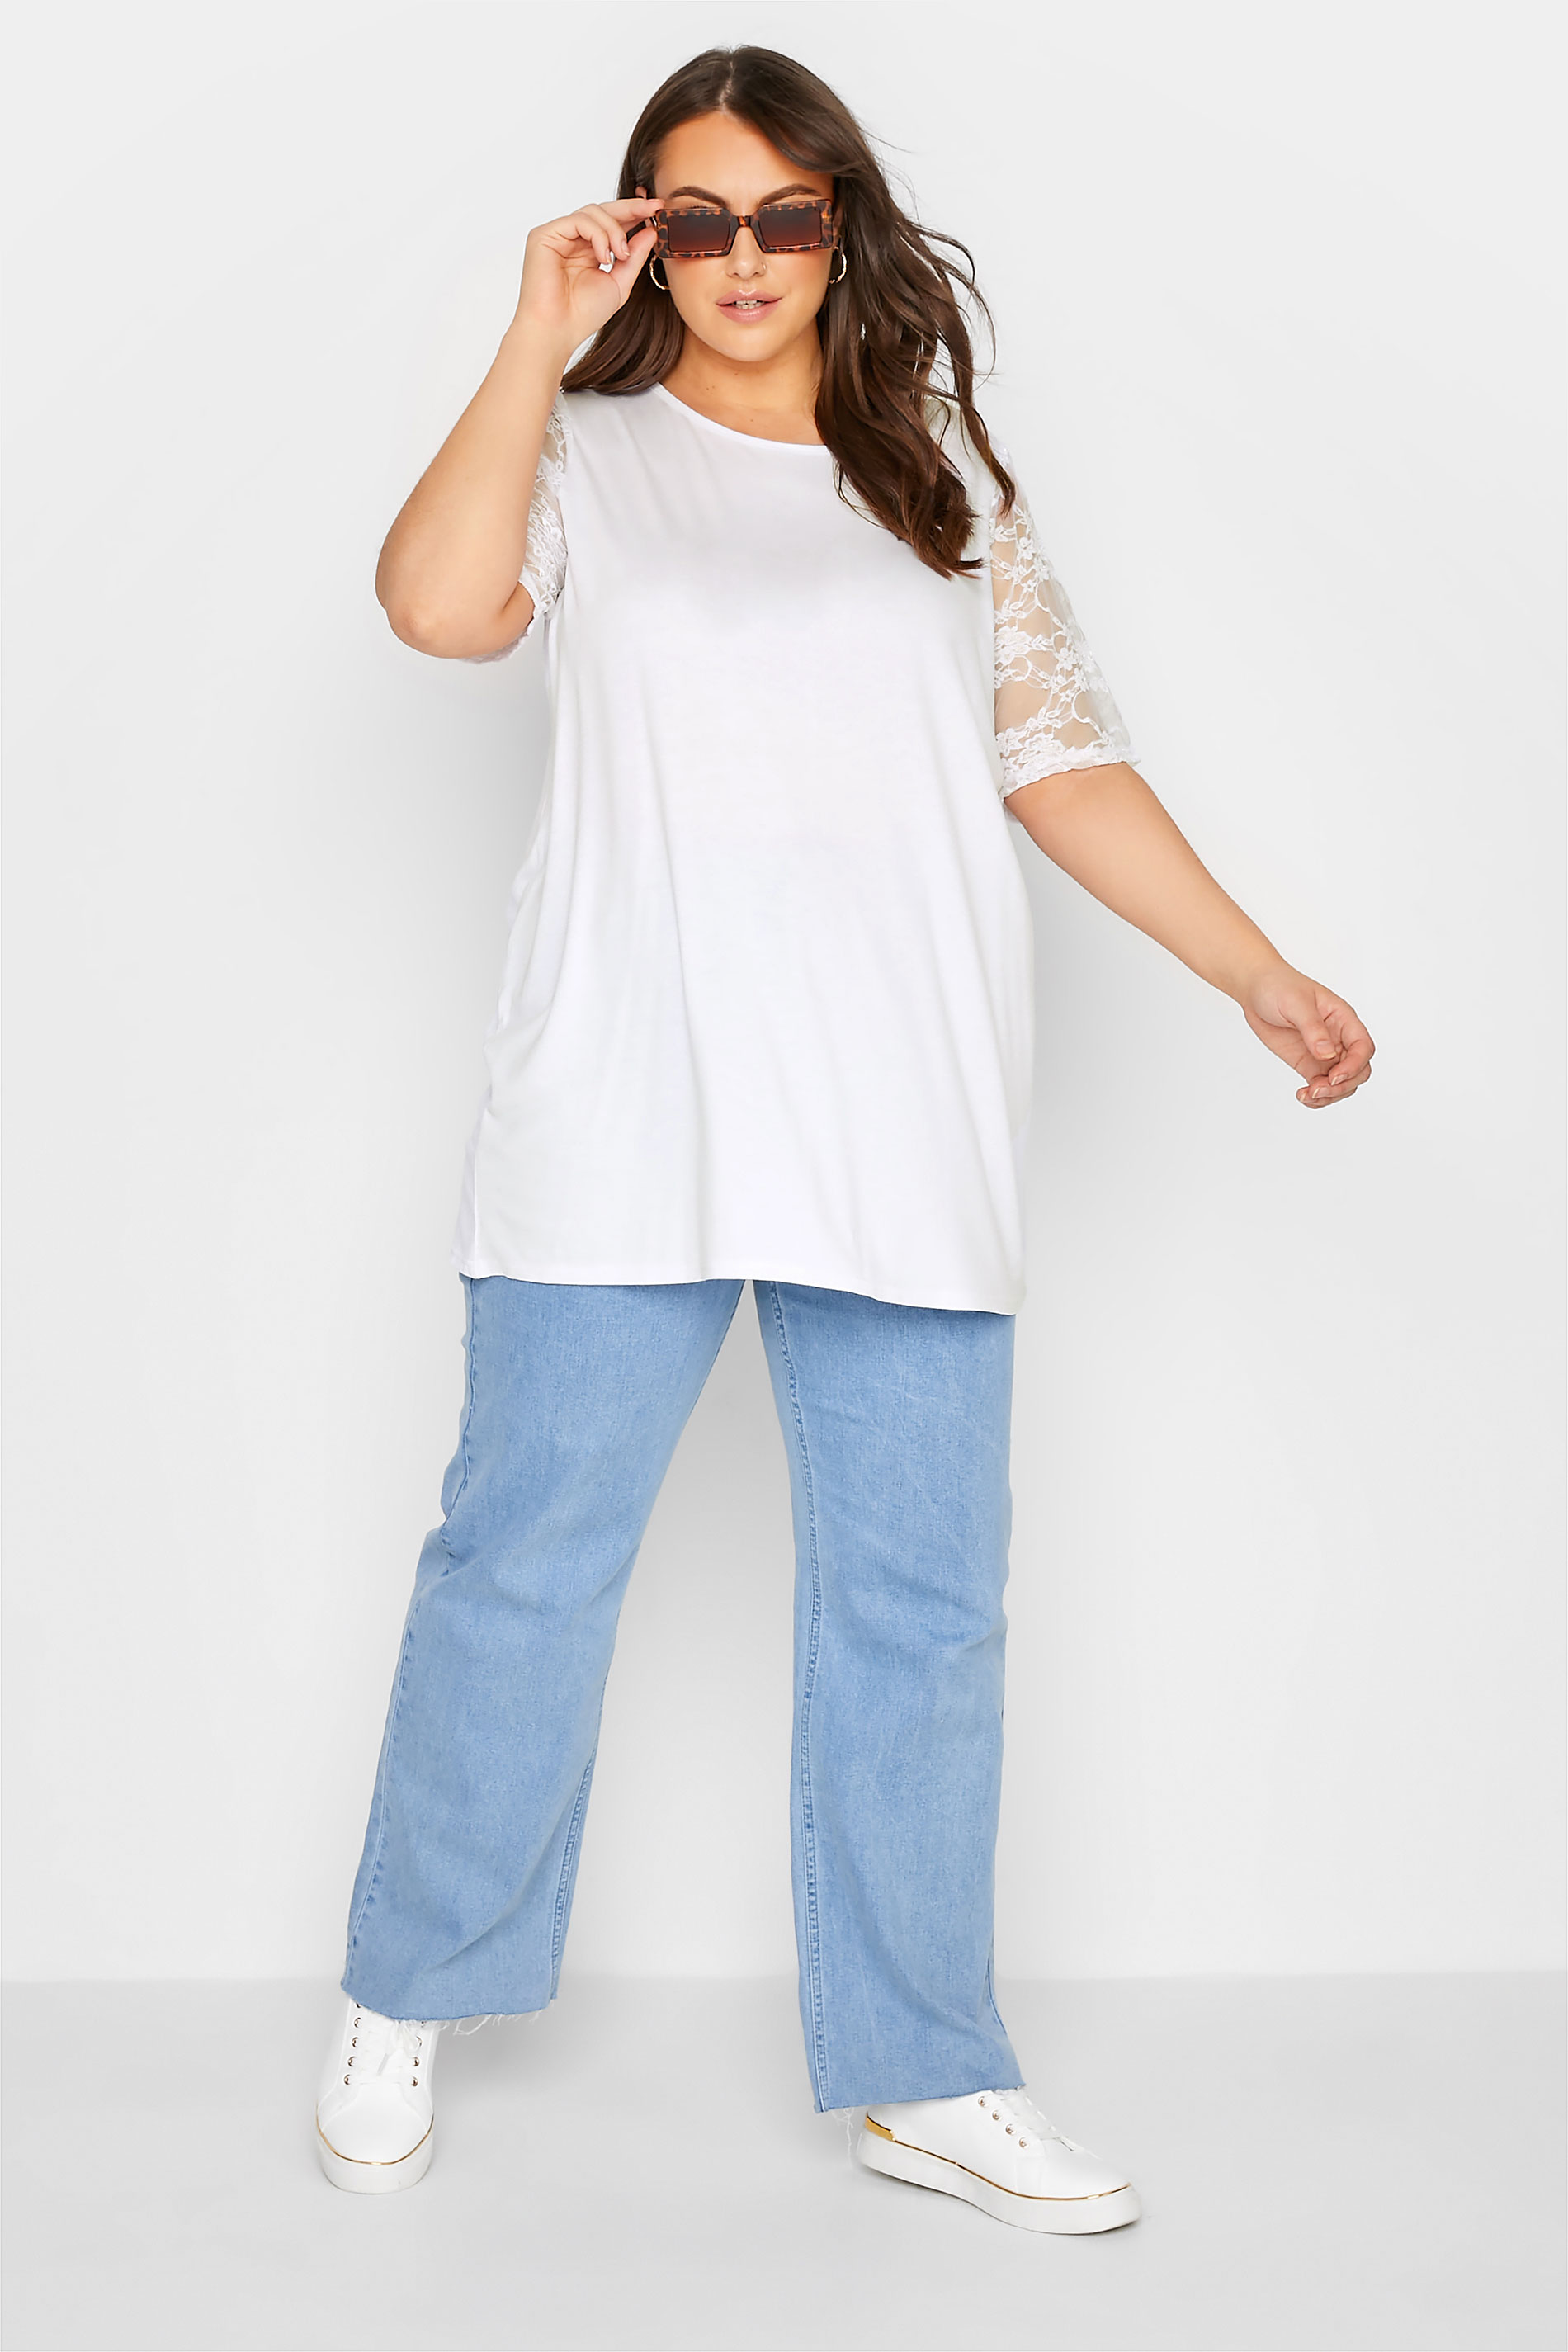 Grande taille  Tops Grande taille  Tops dentelle | LIMITED COLLECTION - Top Blanc Manches Courtes Dentelle - KM50871